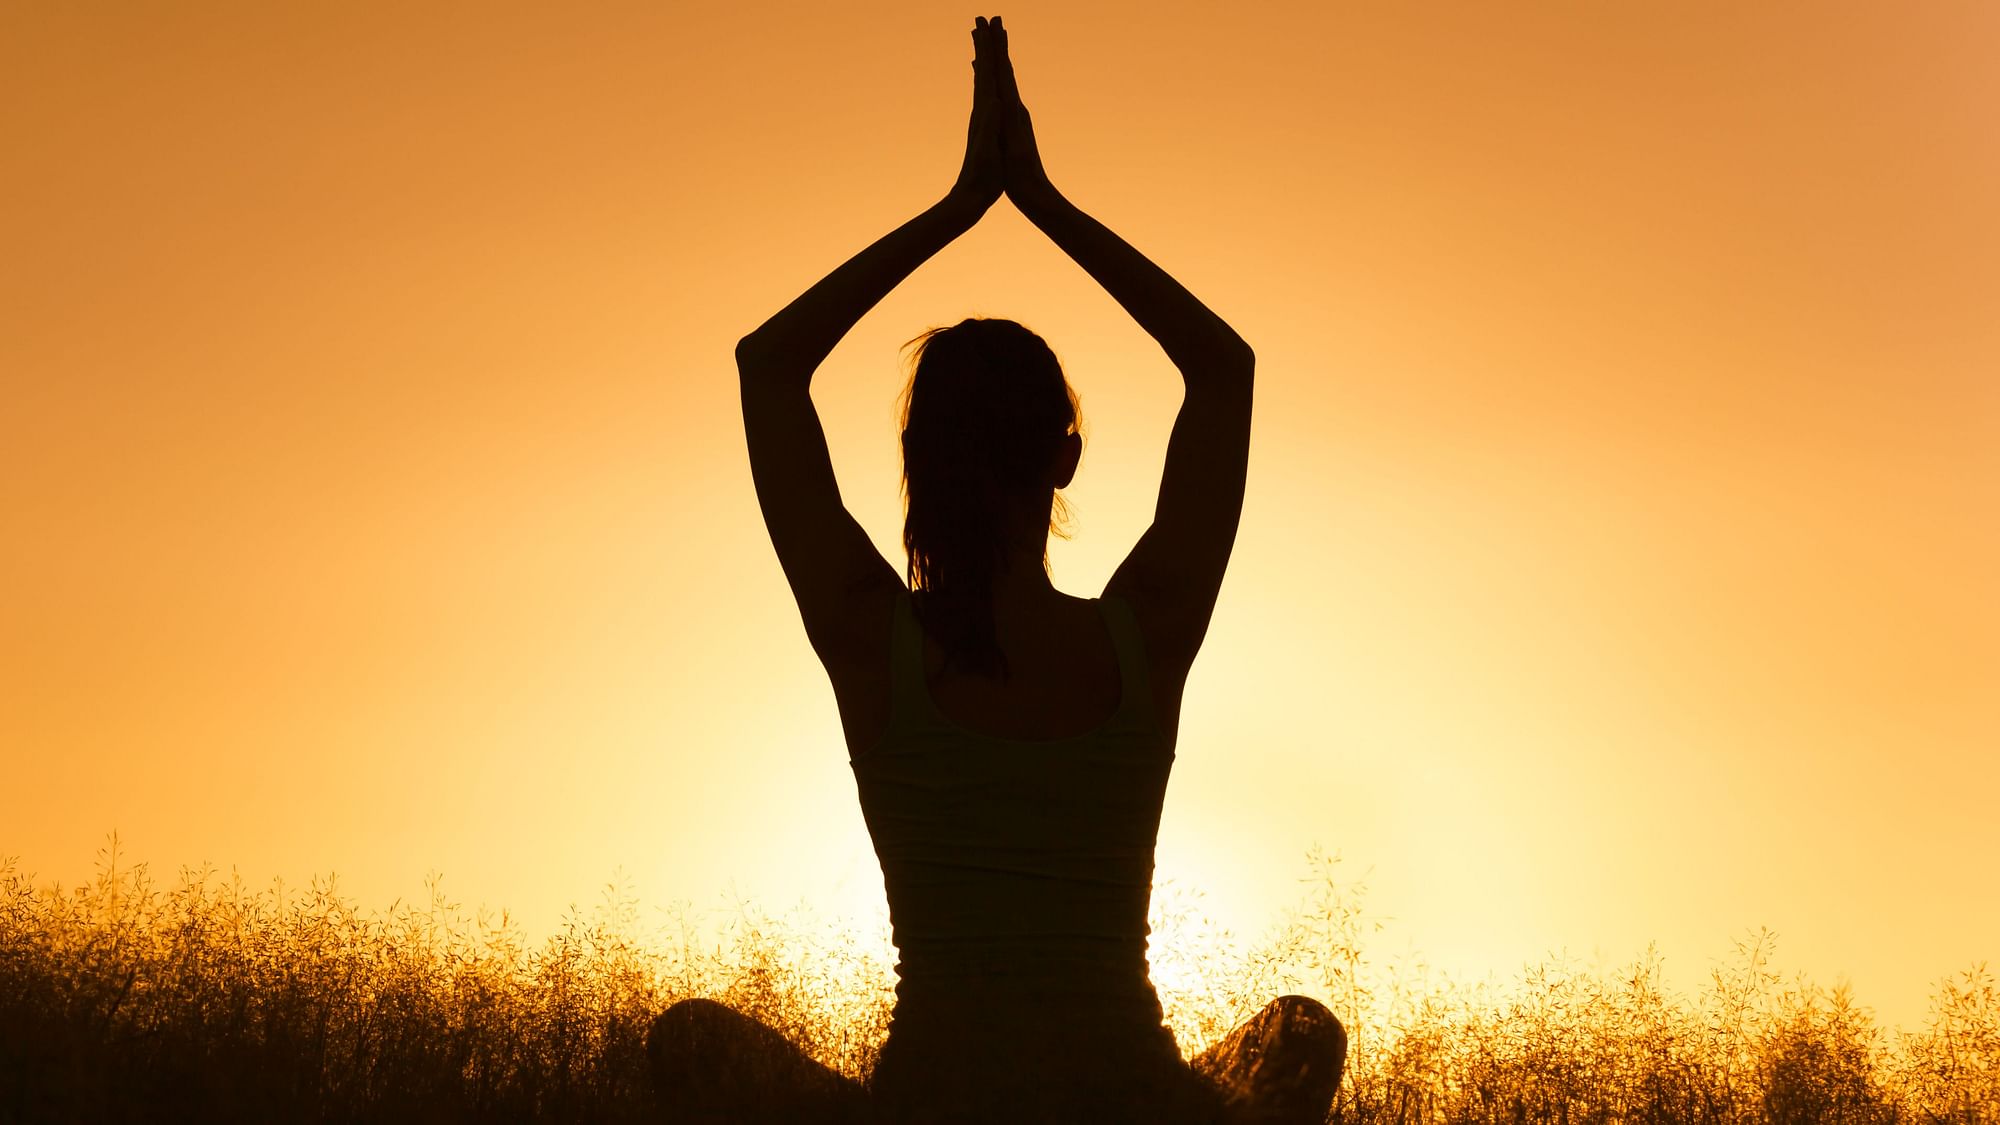 What Are Some Benefits of Yoga? (Happy International Yoga Day